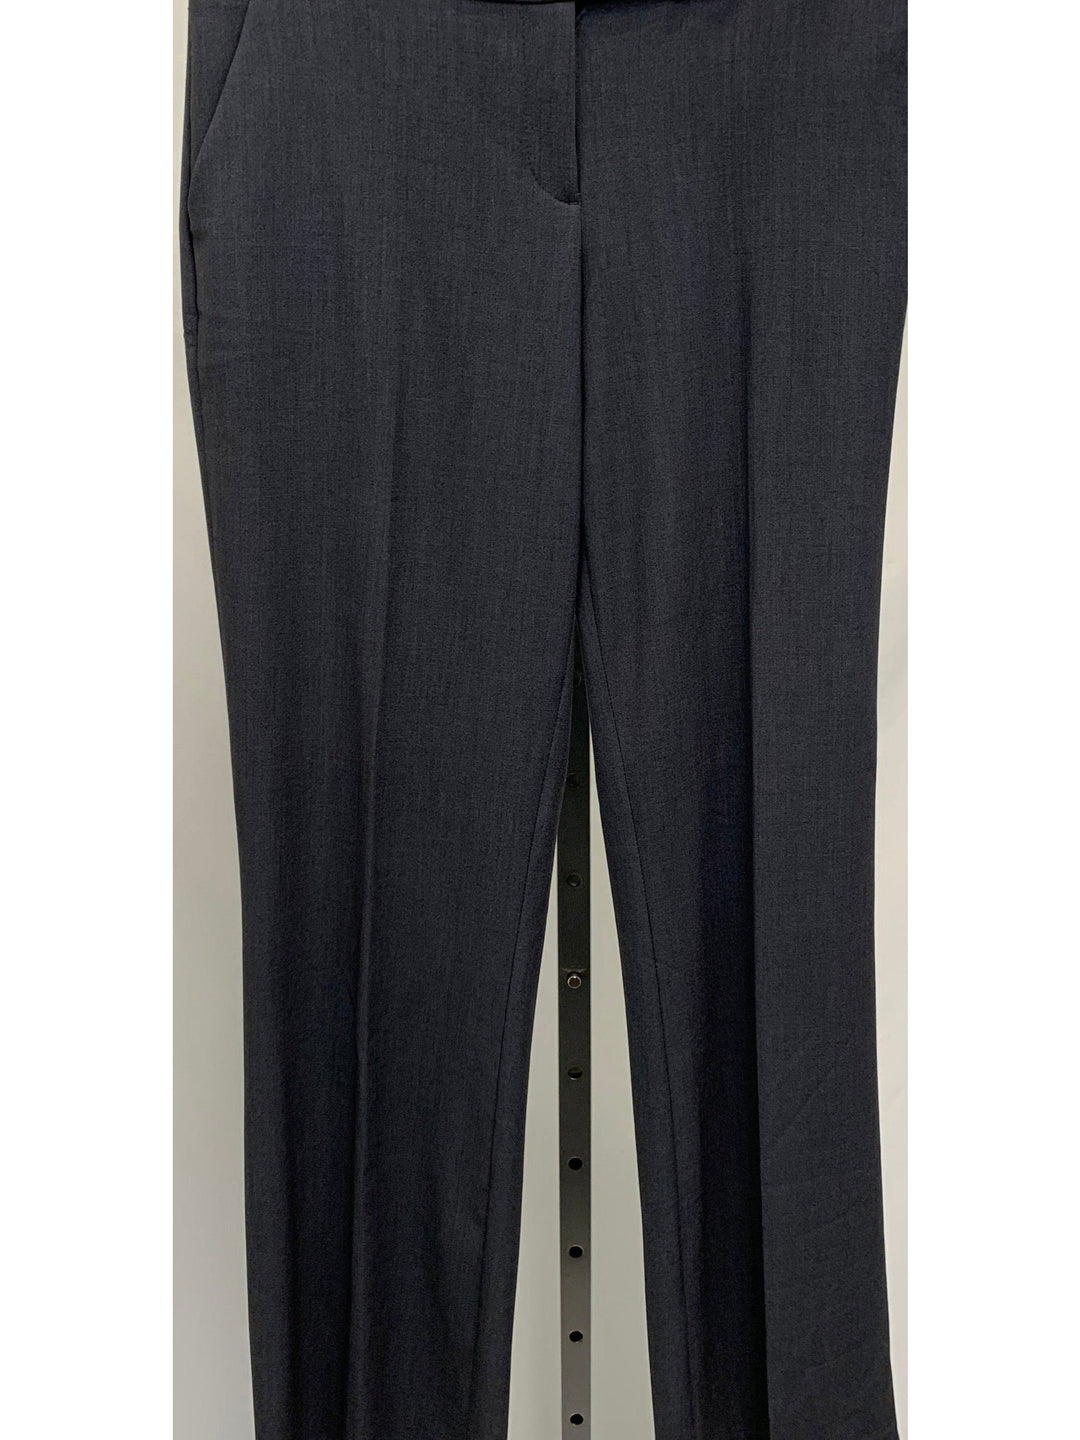 Calvin Klein Grey Pants - Size 6 - The Kennedy Collective Thrift - 